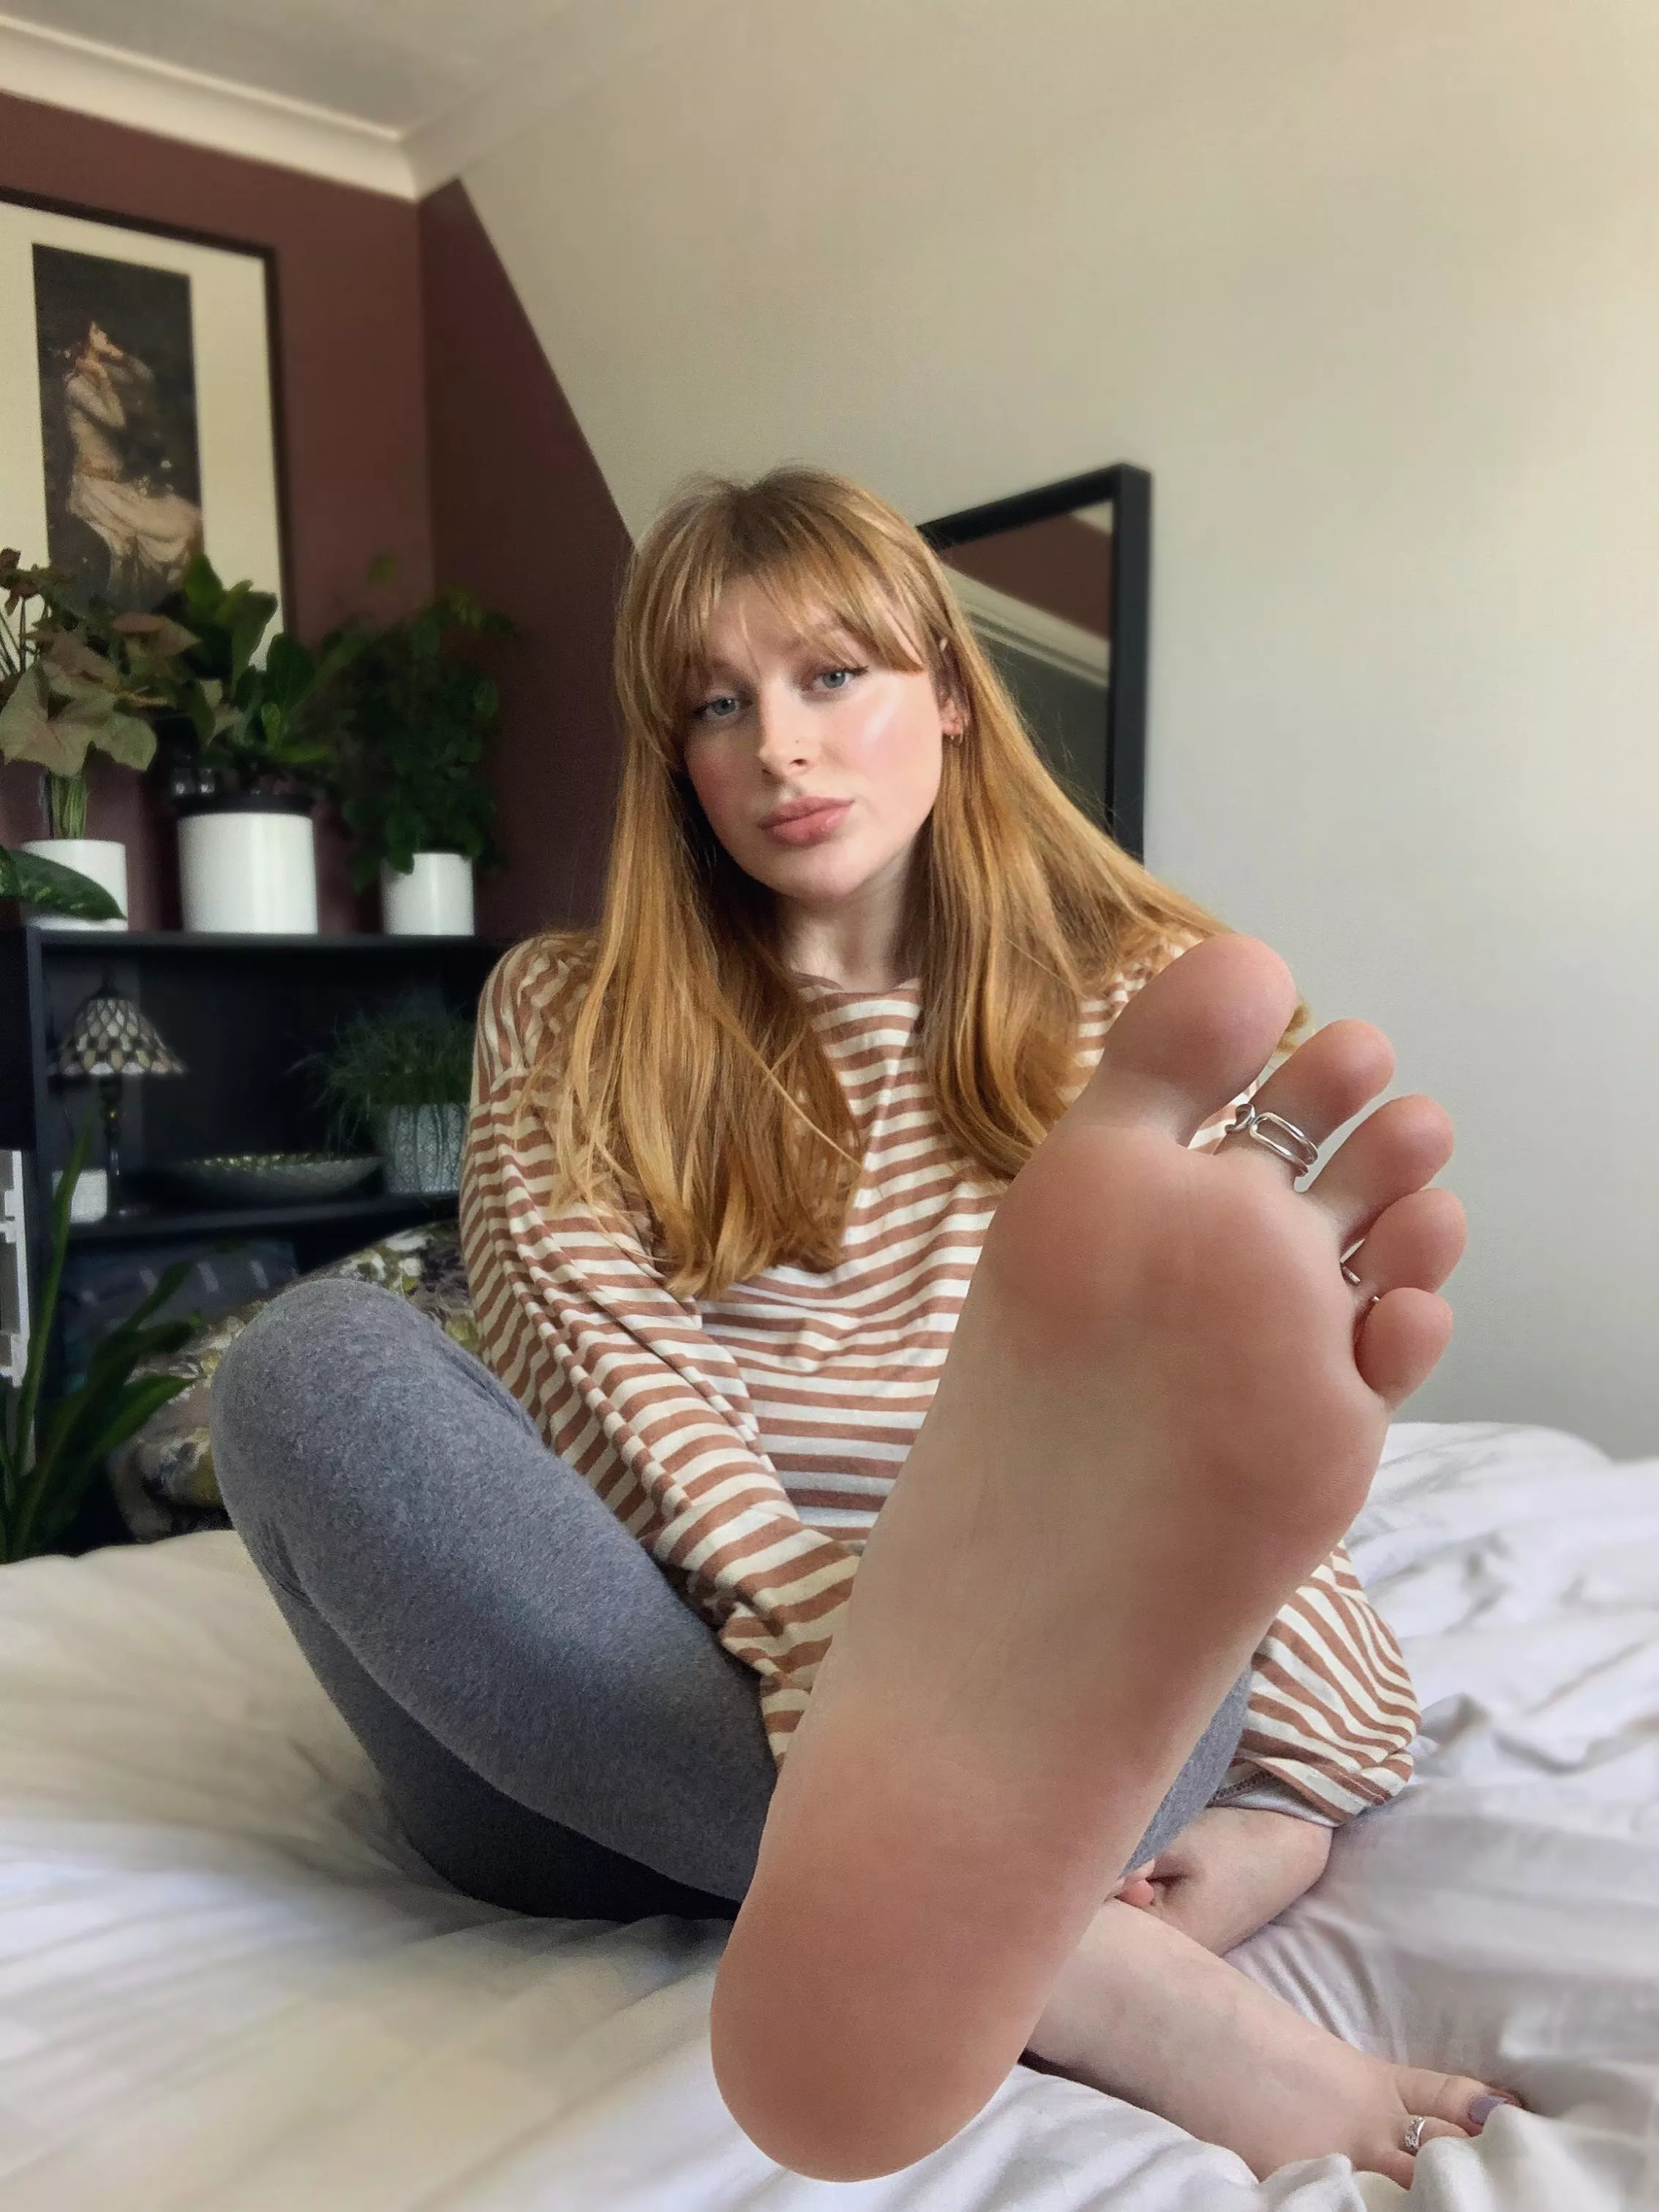 The softest soles in your face! ✨